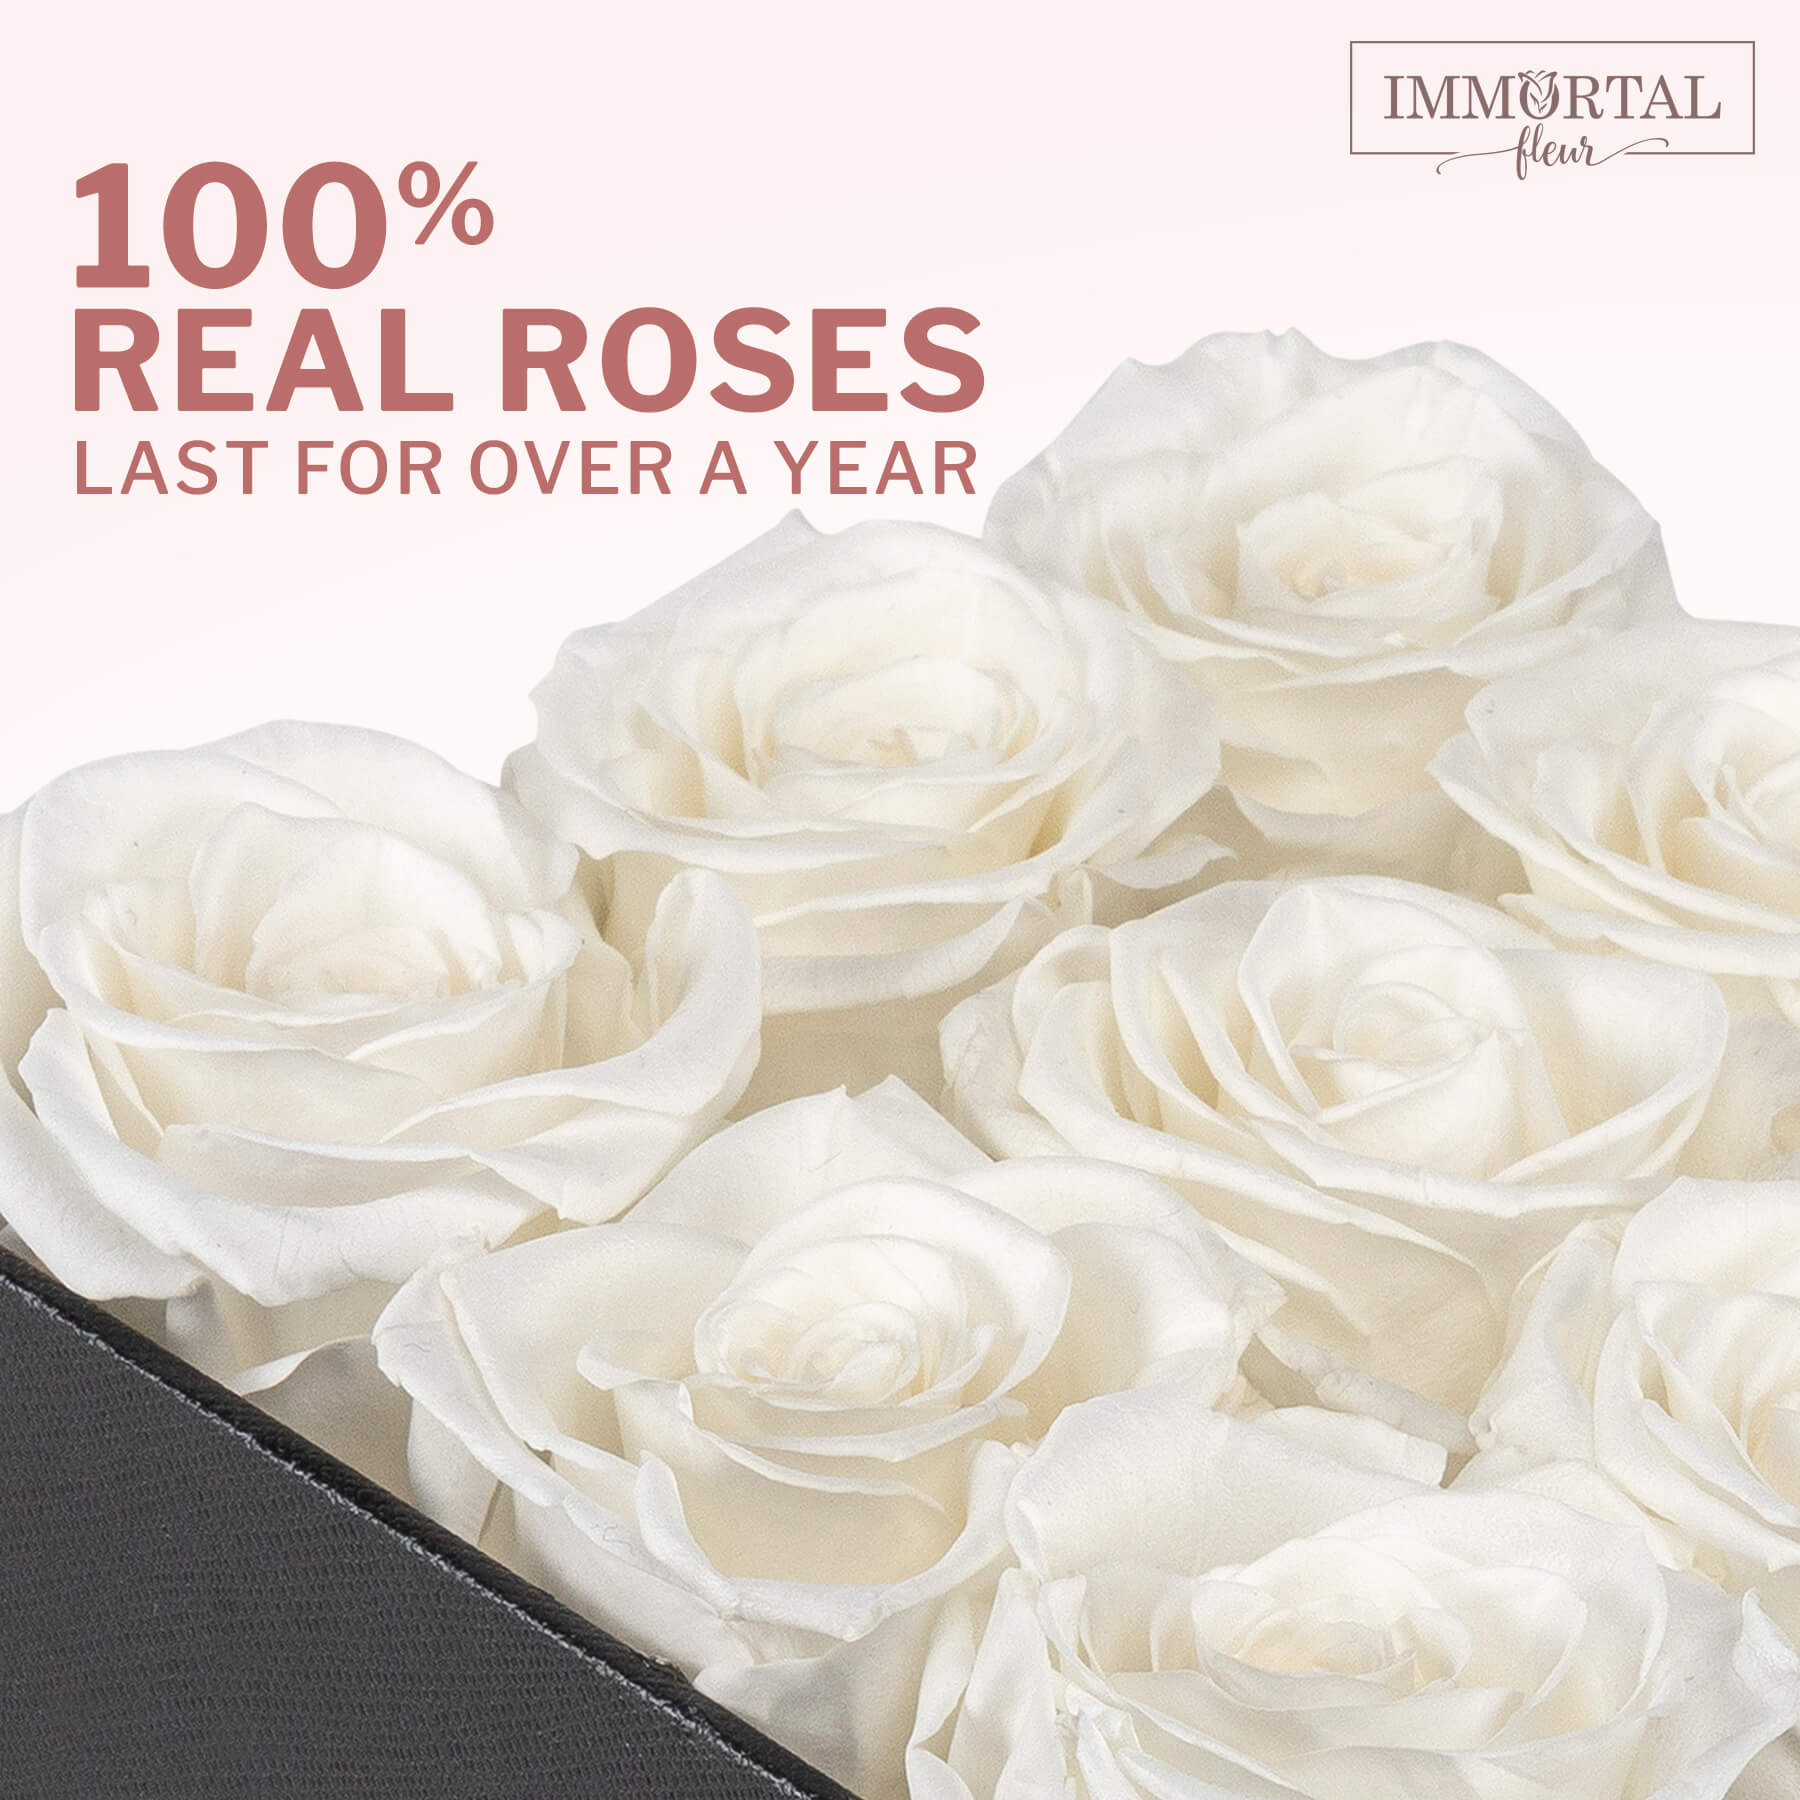 9 White Natural Preserved Roses - Last Over A Year